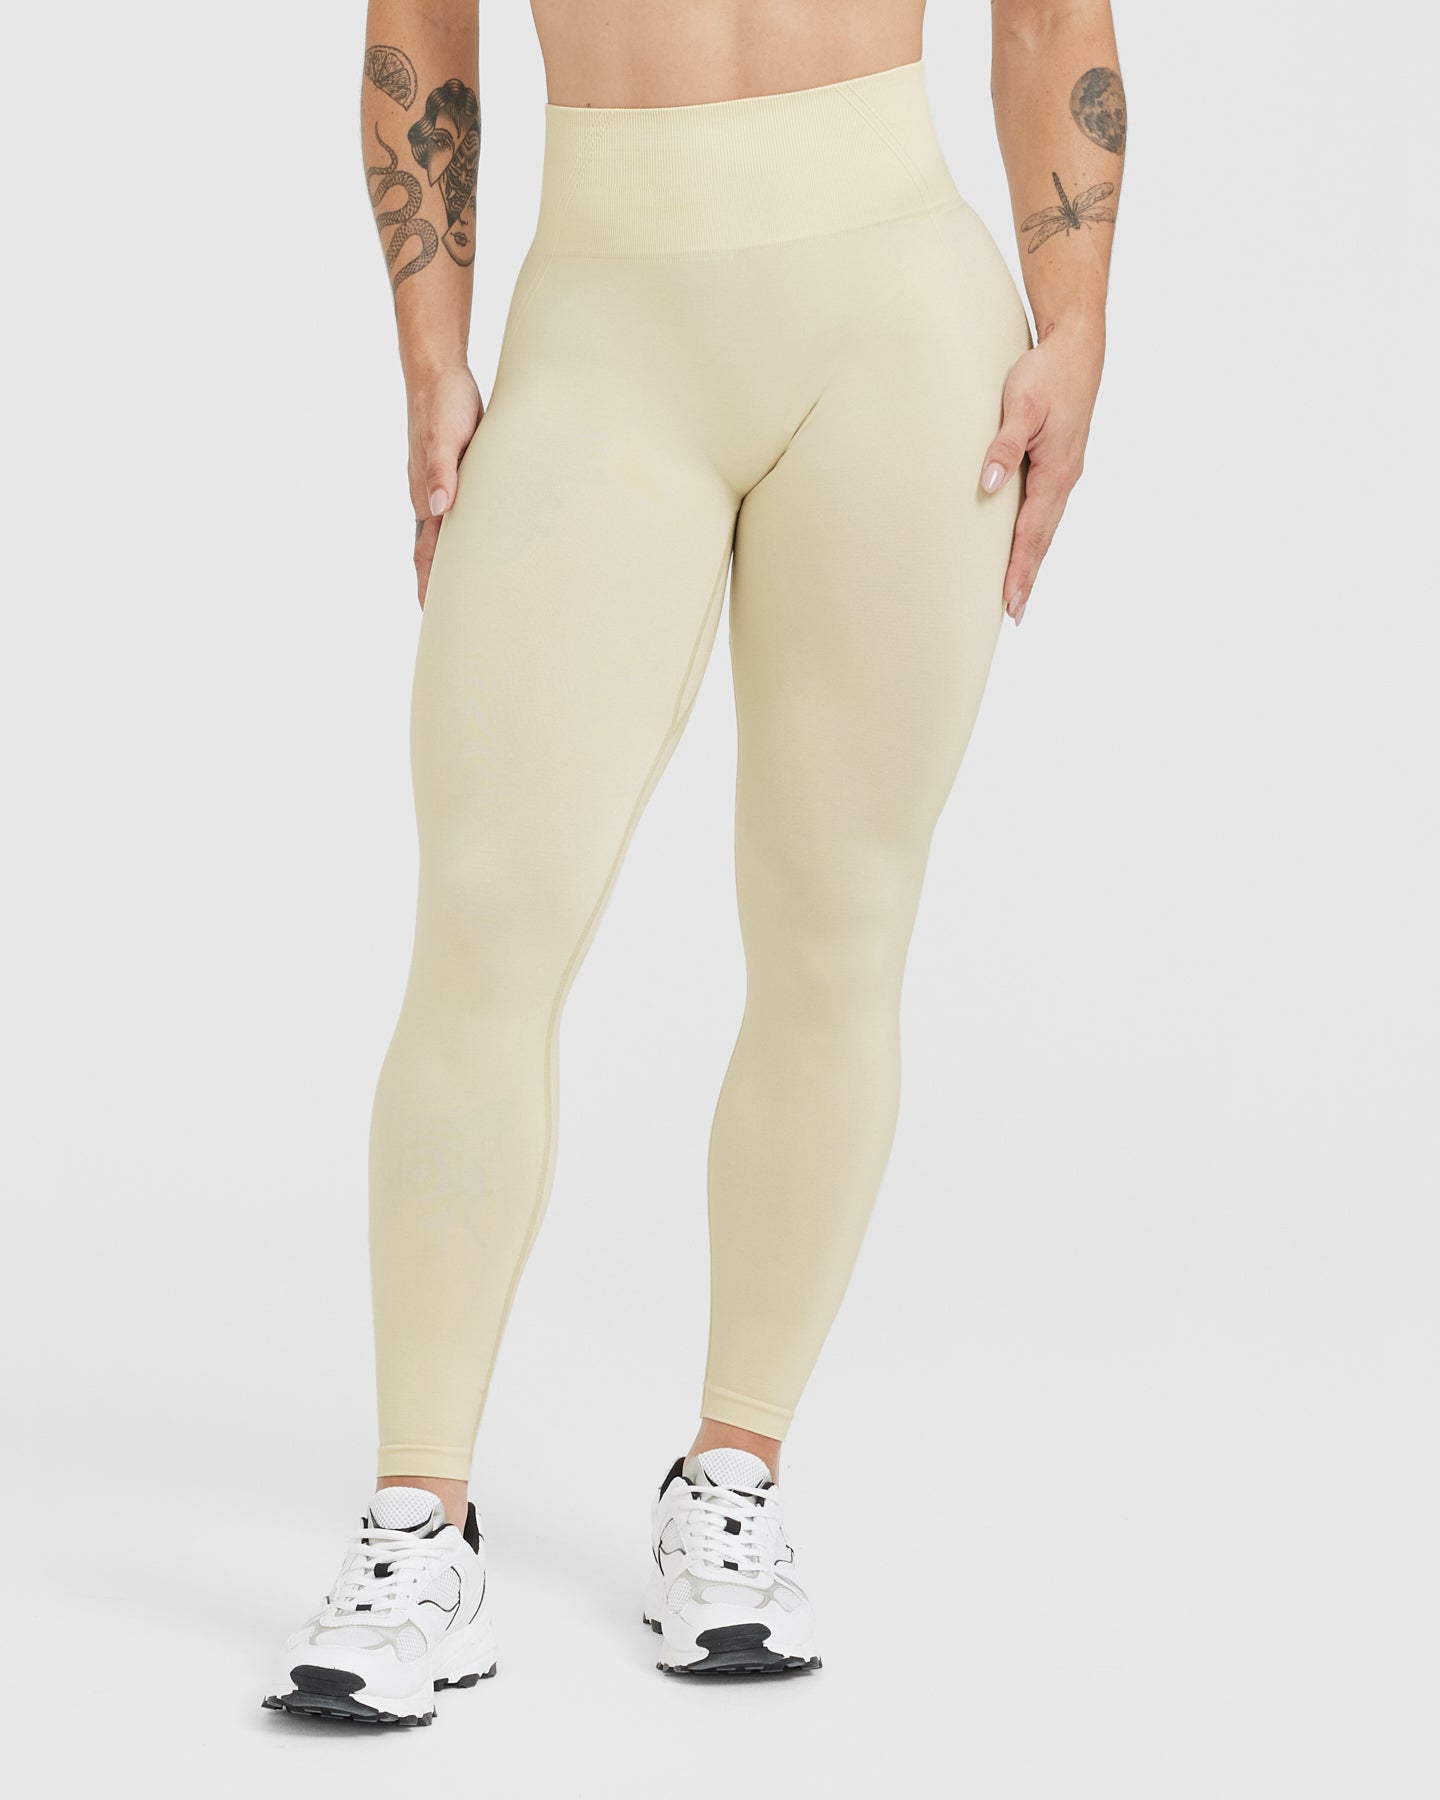 High Waist Seamless Oner Active Leggings For Running, Yoga, And Gym  Workouts Solid Color Athletic Trousers For Women From Zbzt, $22.53